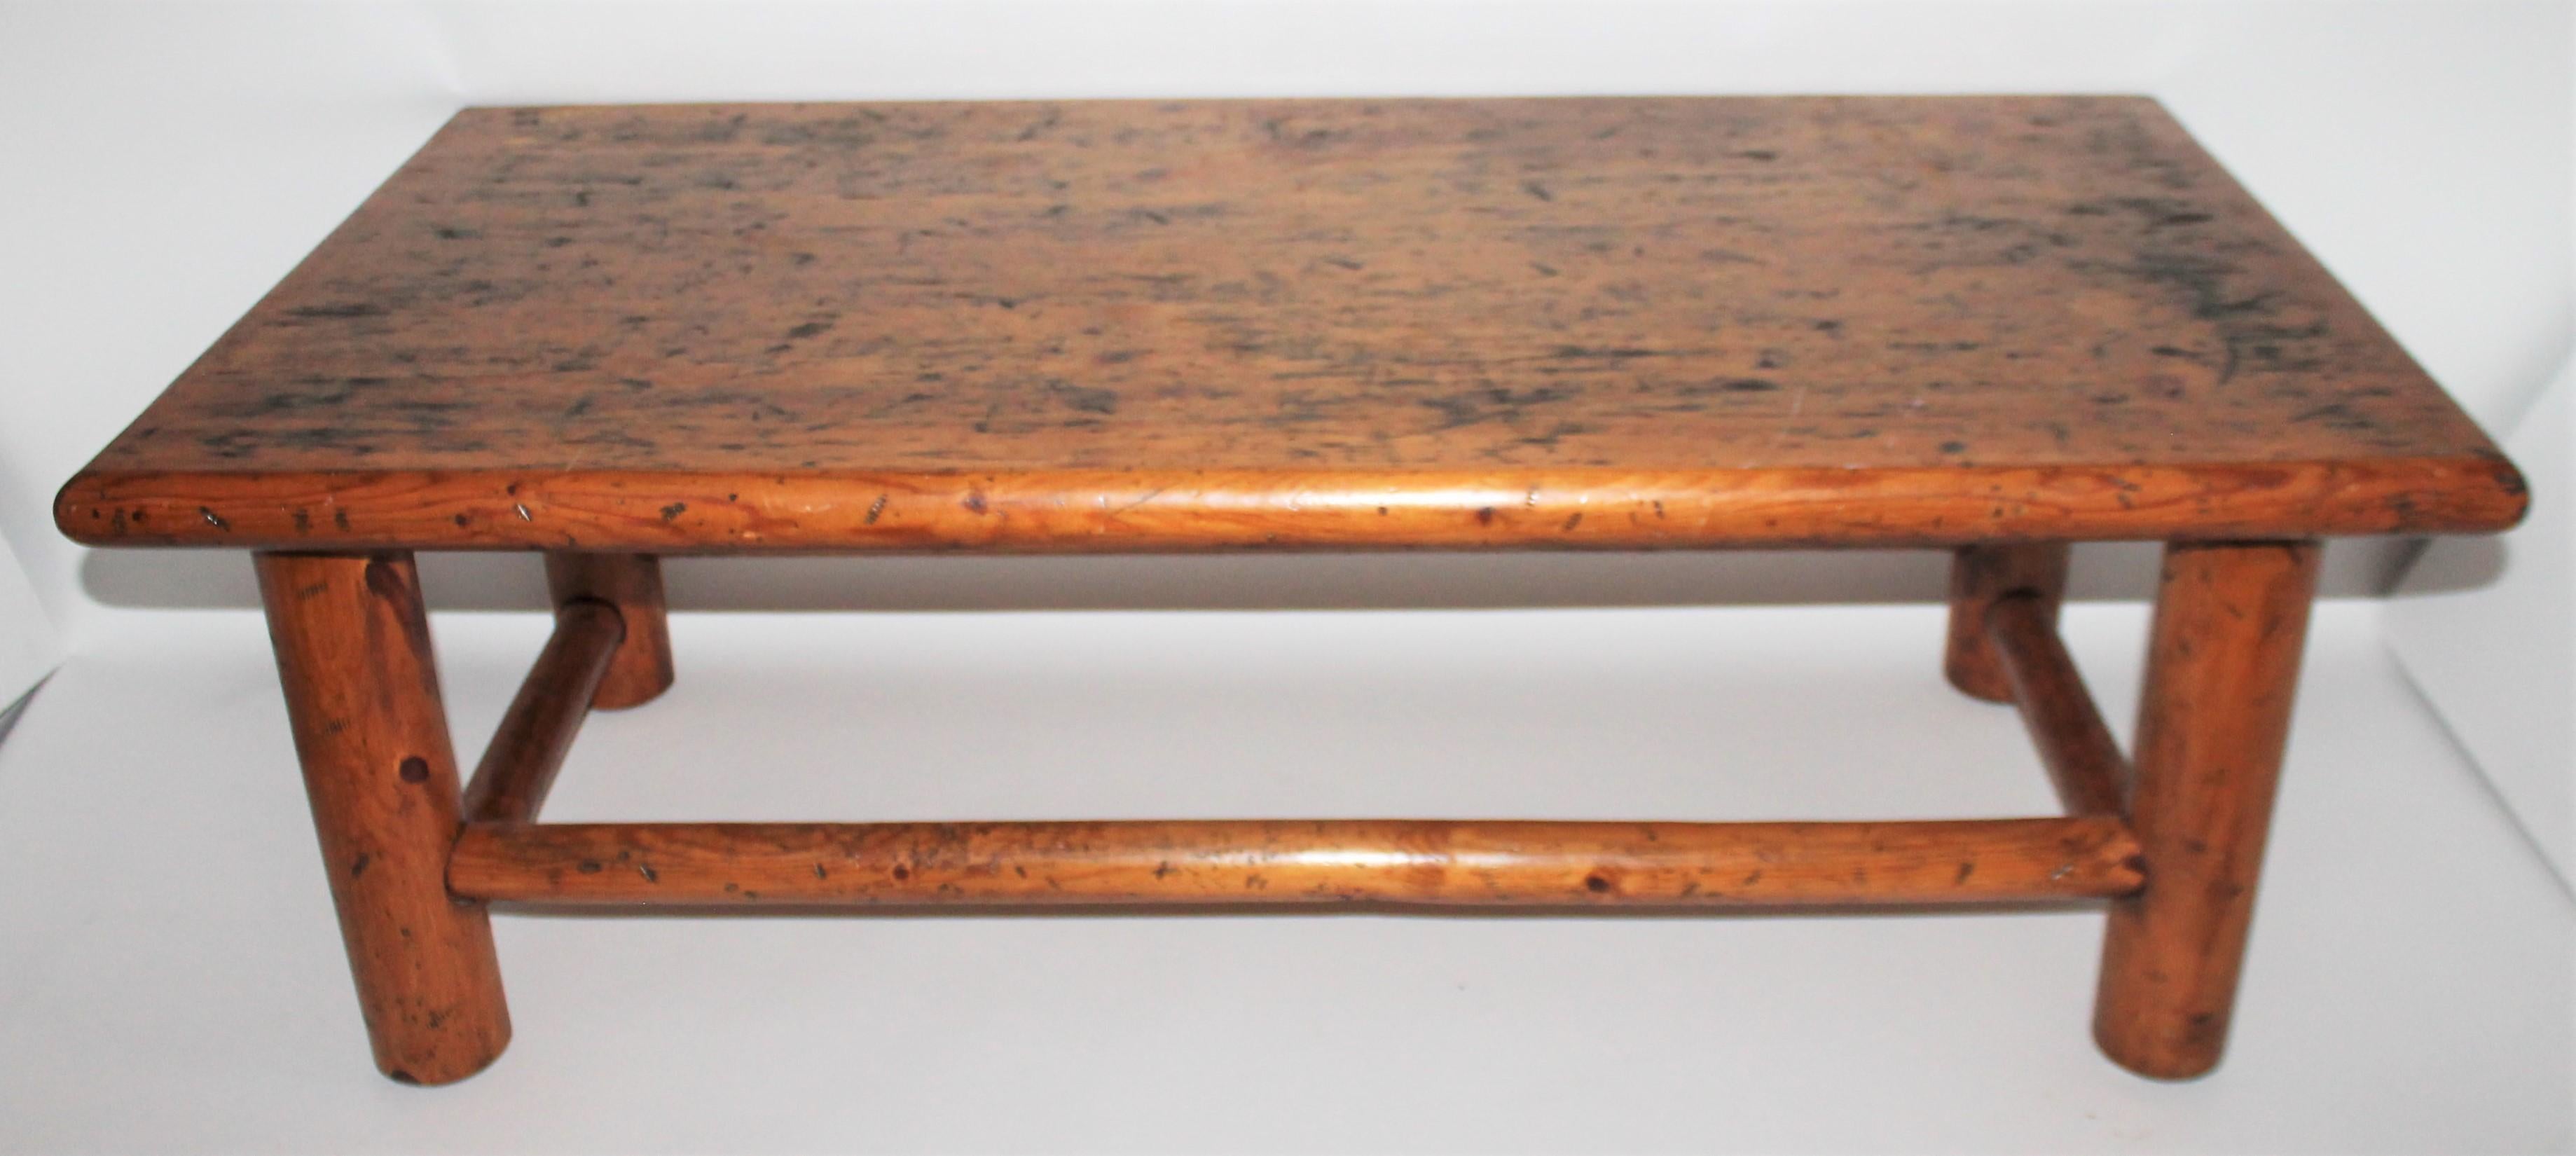 This rustic hickory and pine coffee table is handmade in Oregon. It is stamped on the bottom of the table top.